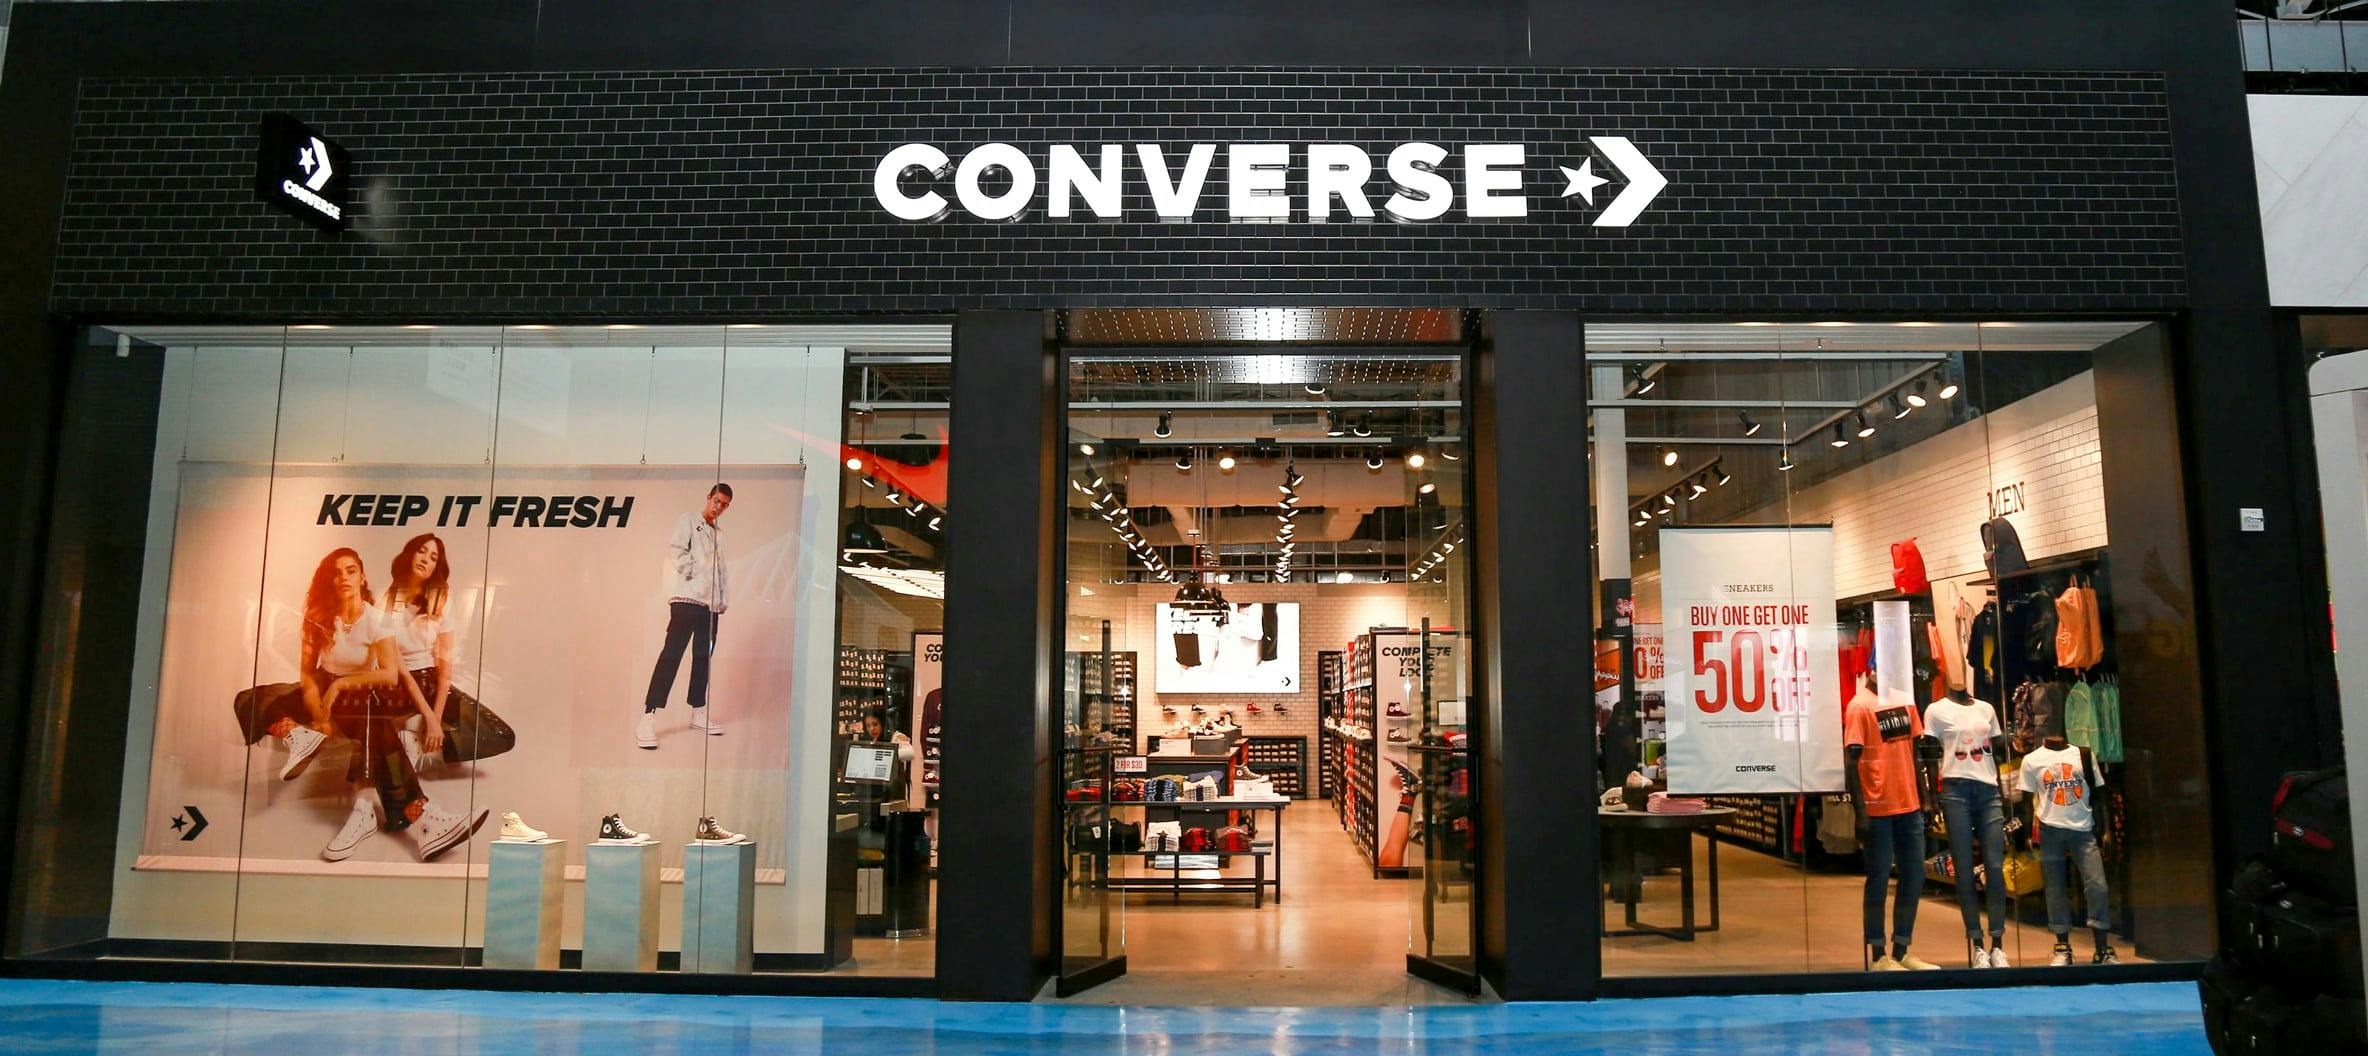 nødvendighed kalk Civic Converse | Miami | Dolphin Mall